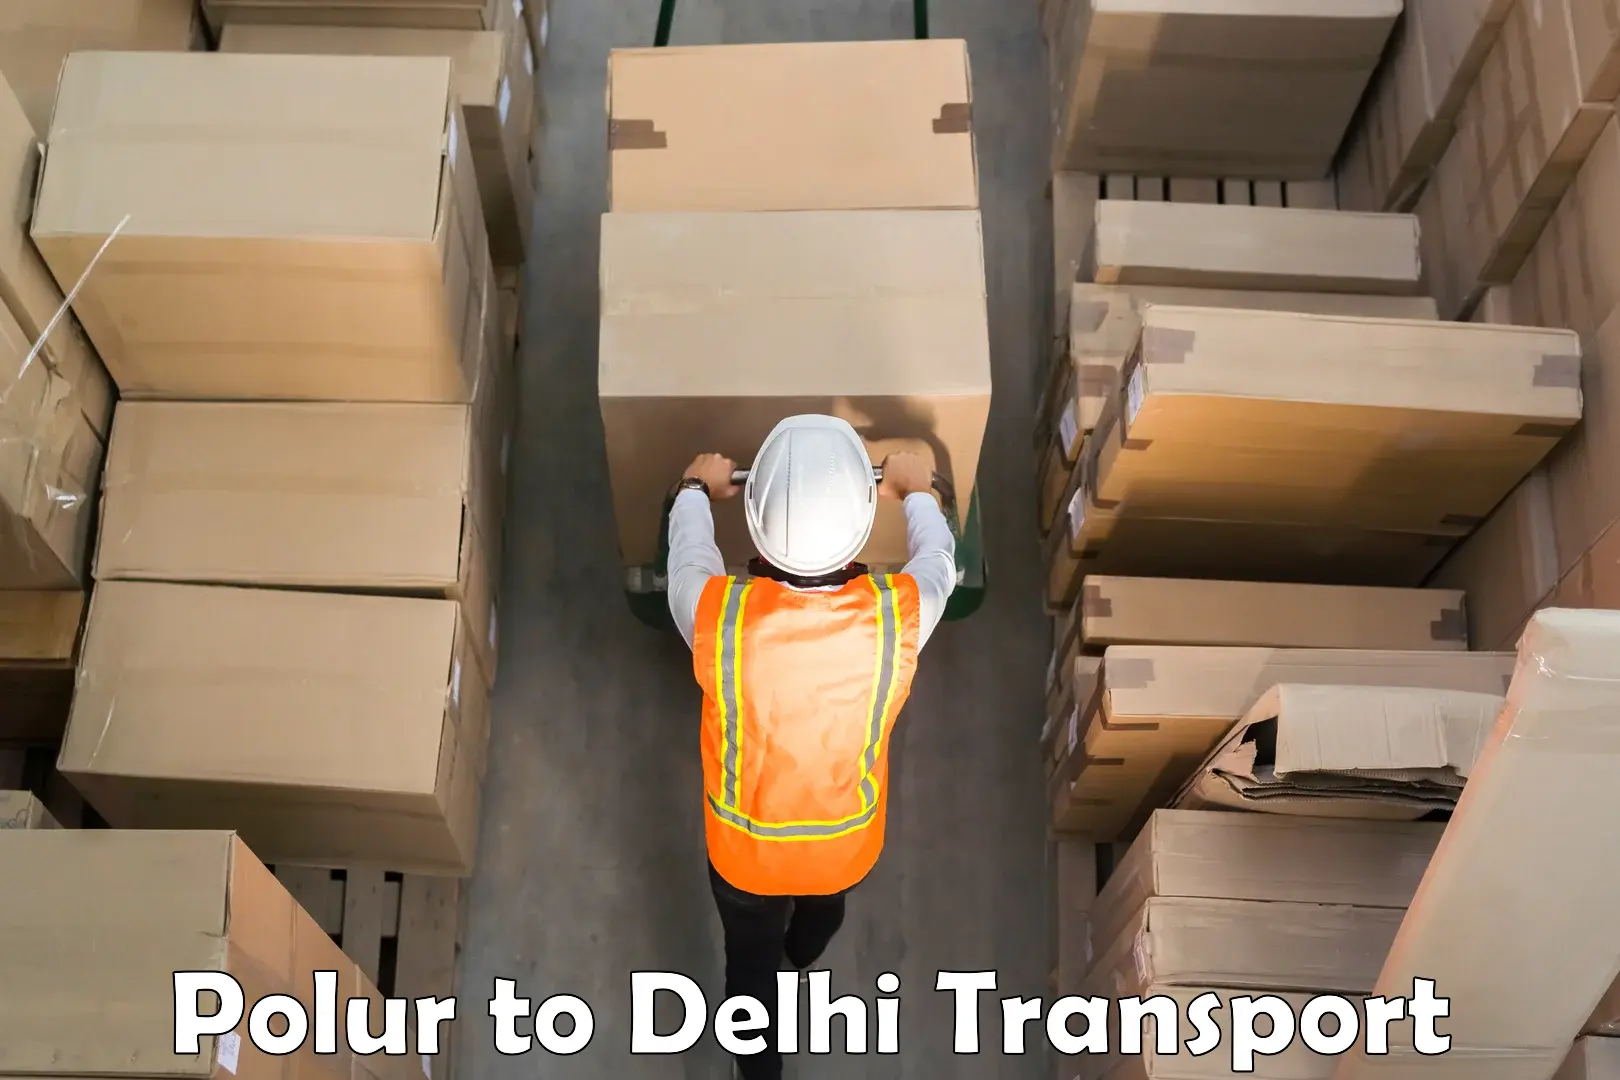 Container transport service in Polur to University of Delhi